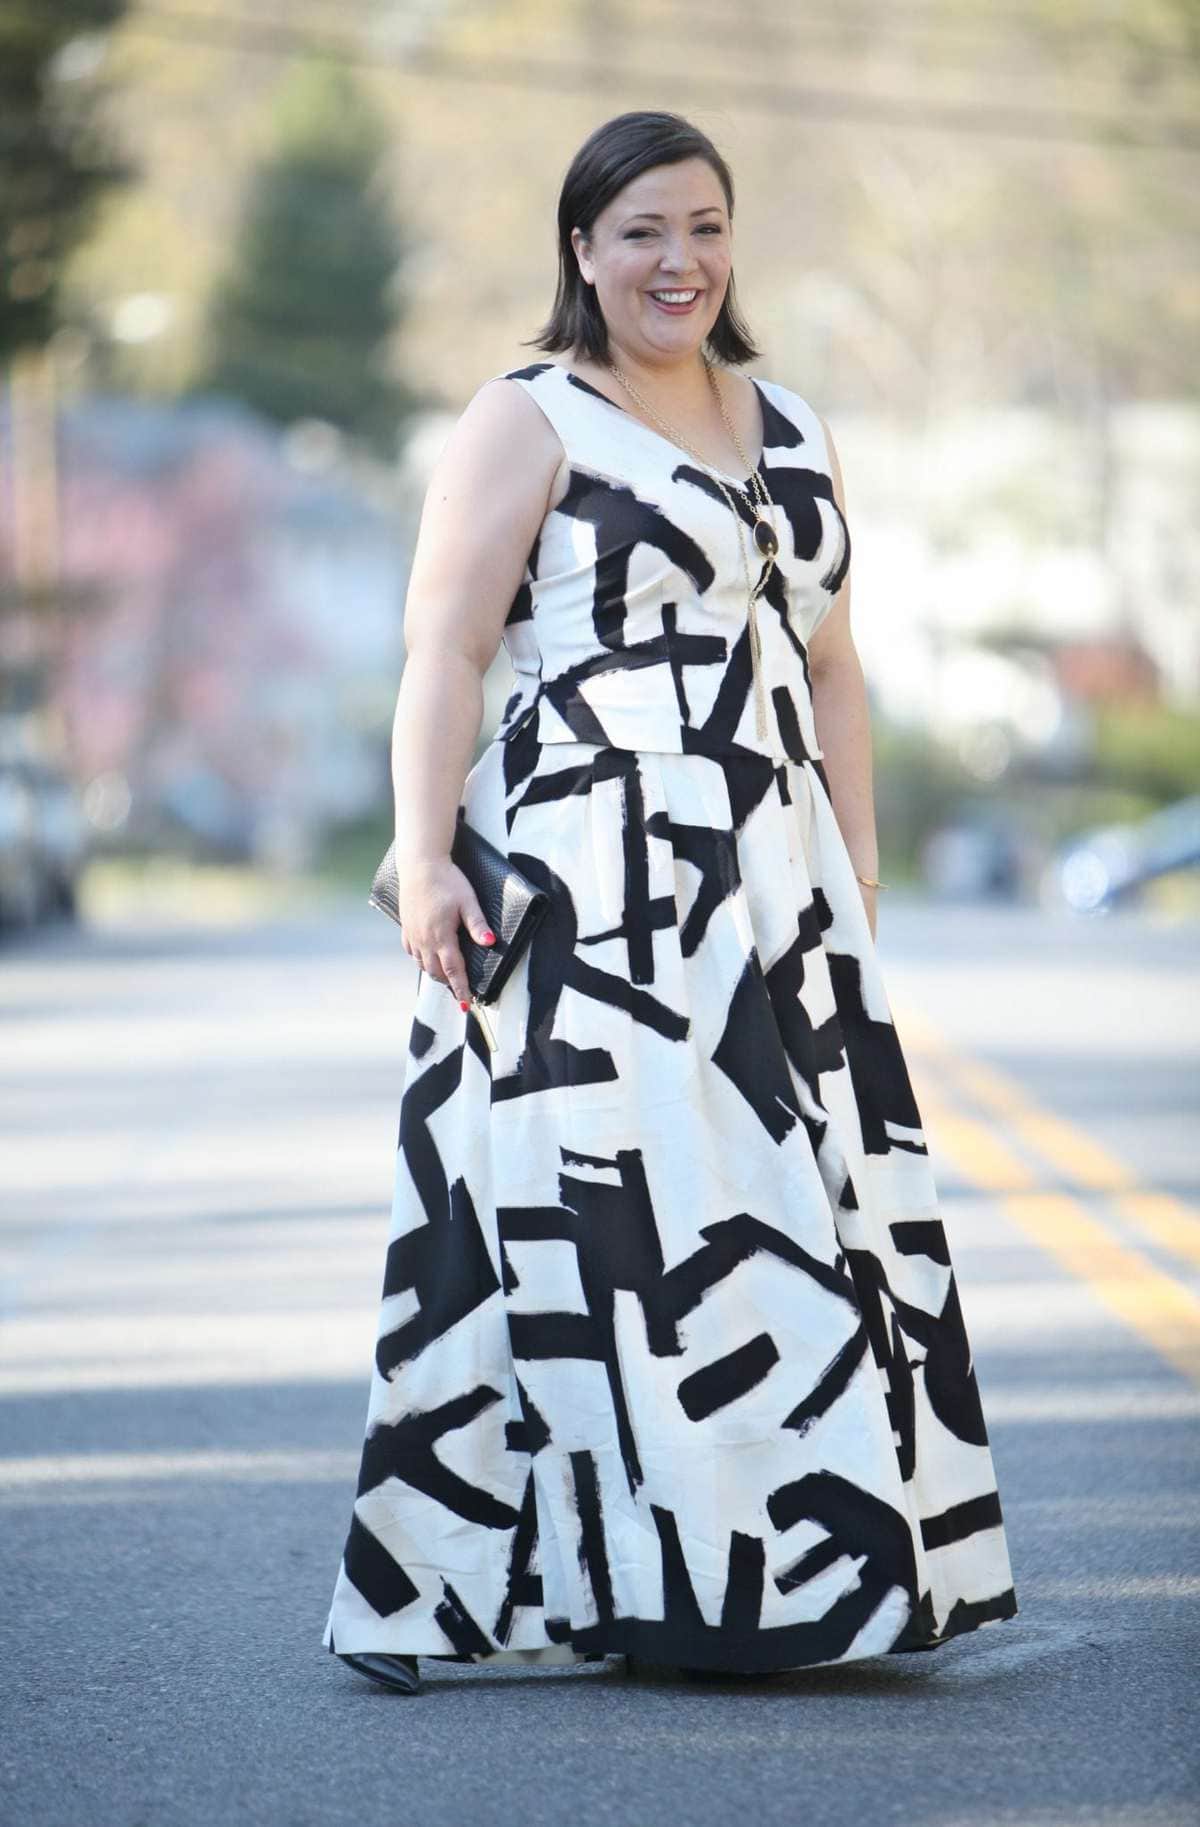 Wardrobe Oxygen, over 40 fashion blogger wearing a Nic + Zoe brushstrokes skirt and top